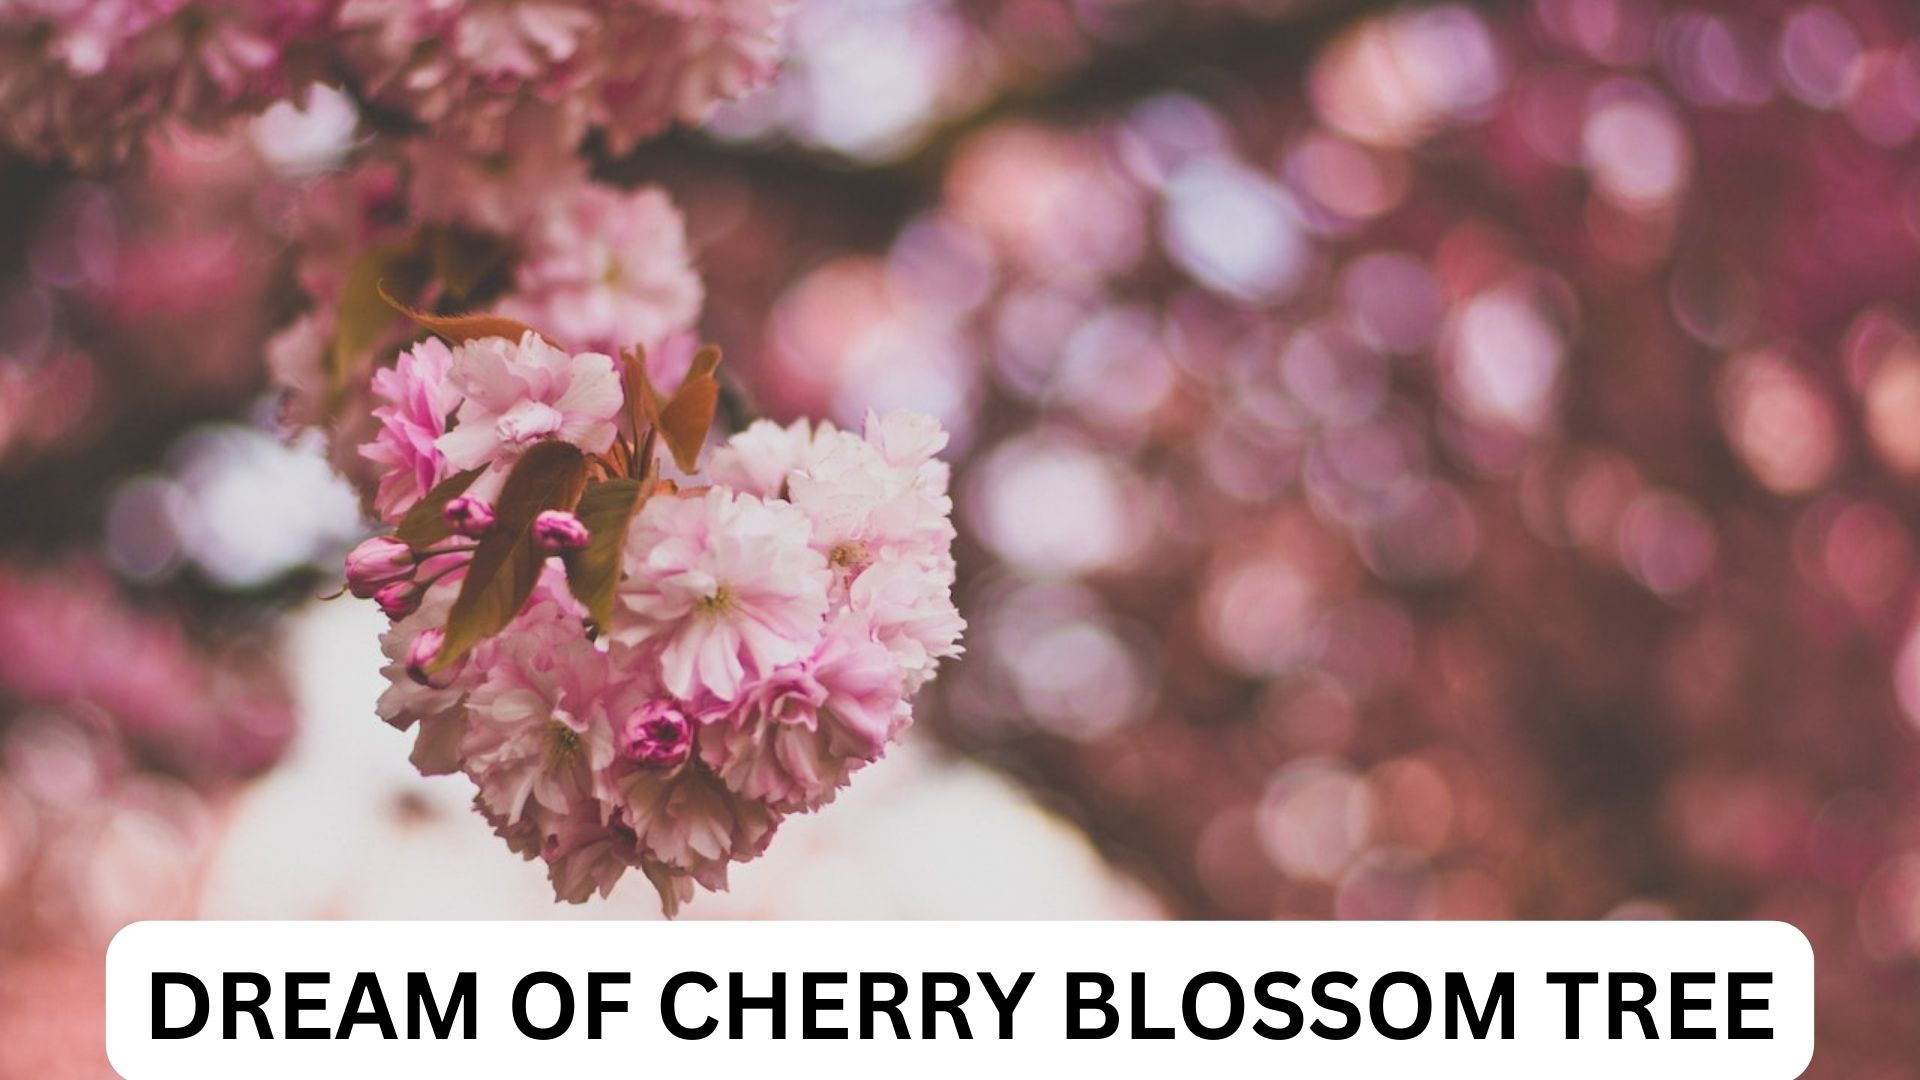 Dream Of Cherry Blossom Tree - Refers To Desiring A Happy Family